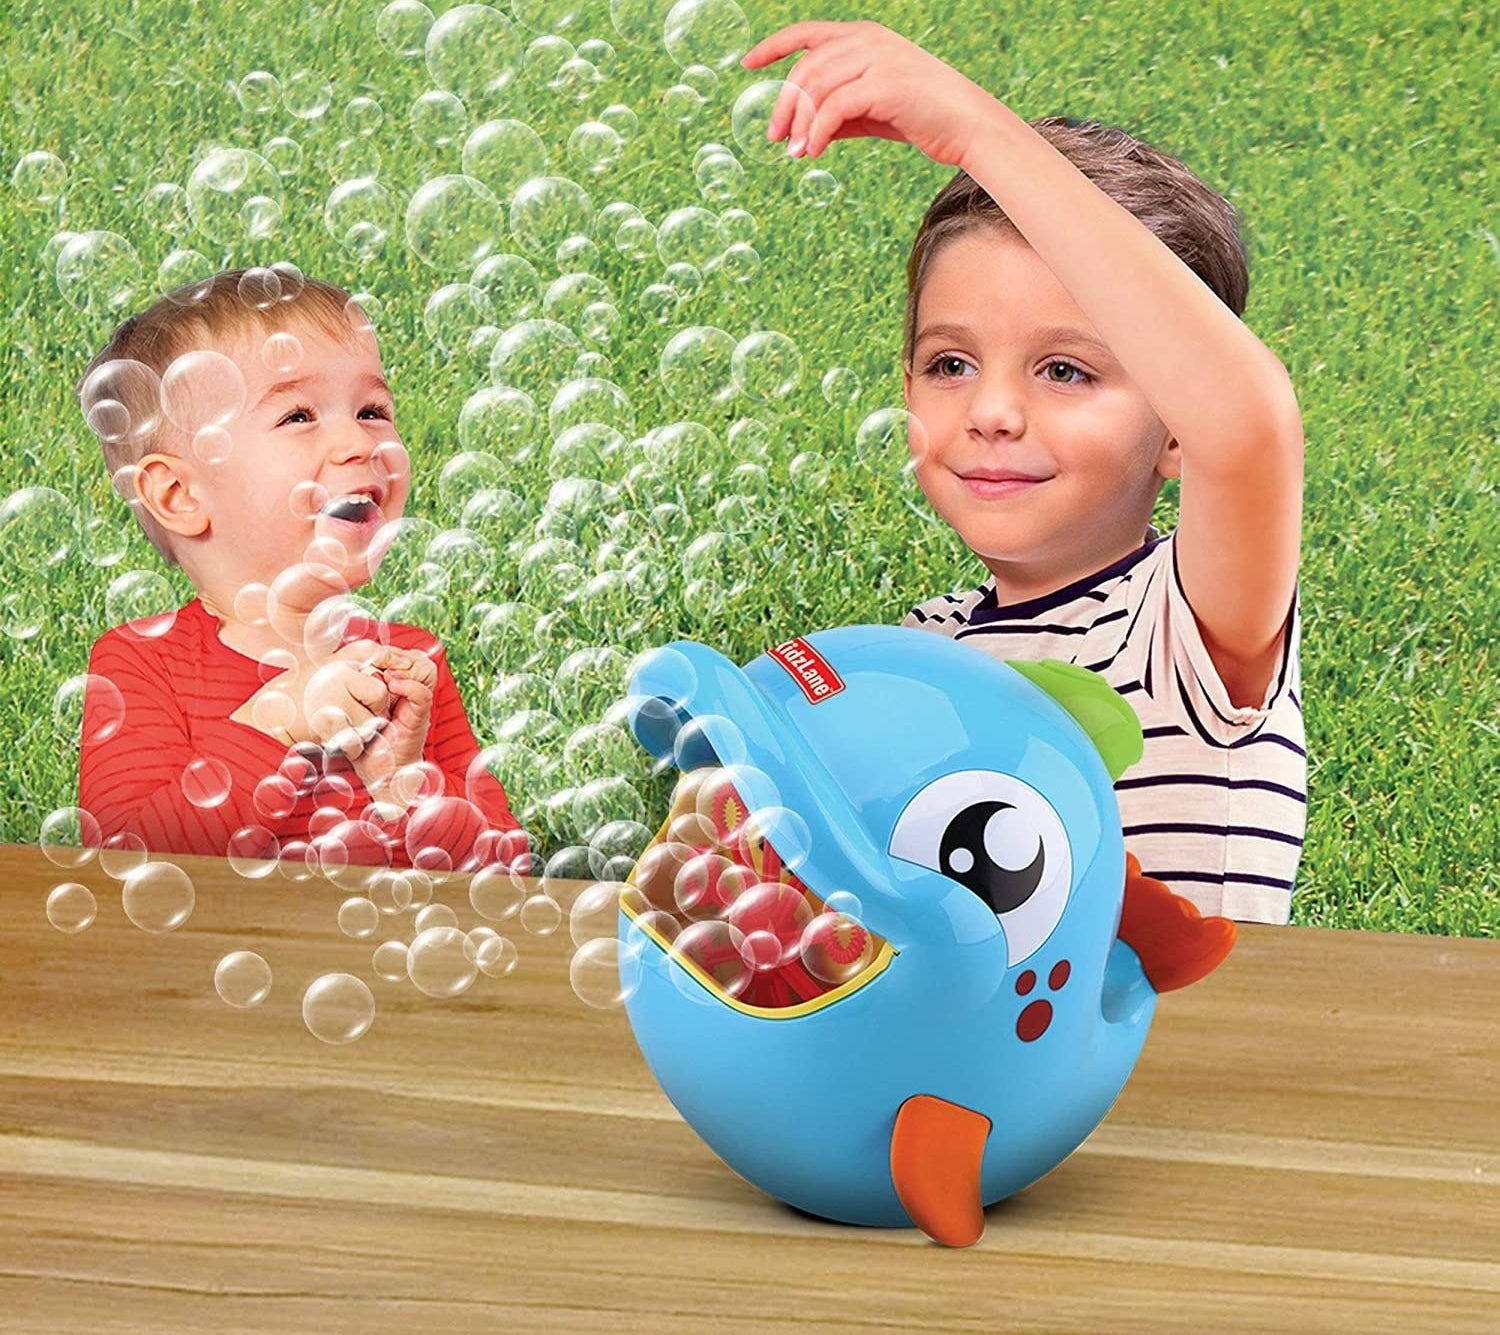 Light blue dolphin bubble machine toy being enjoyed by two children outside